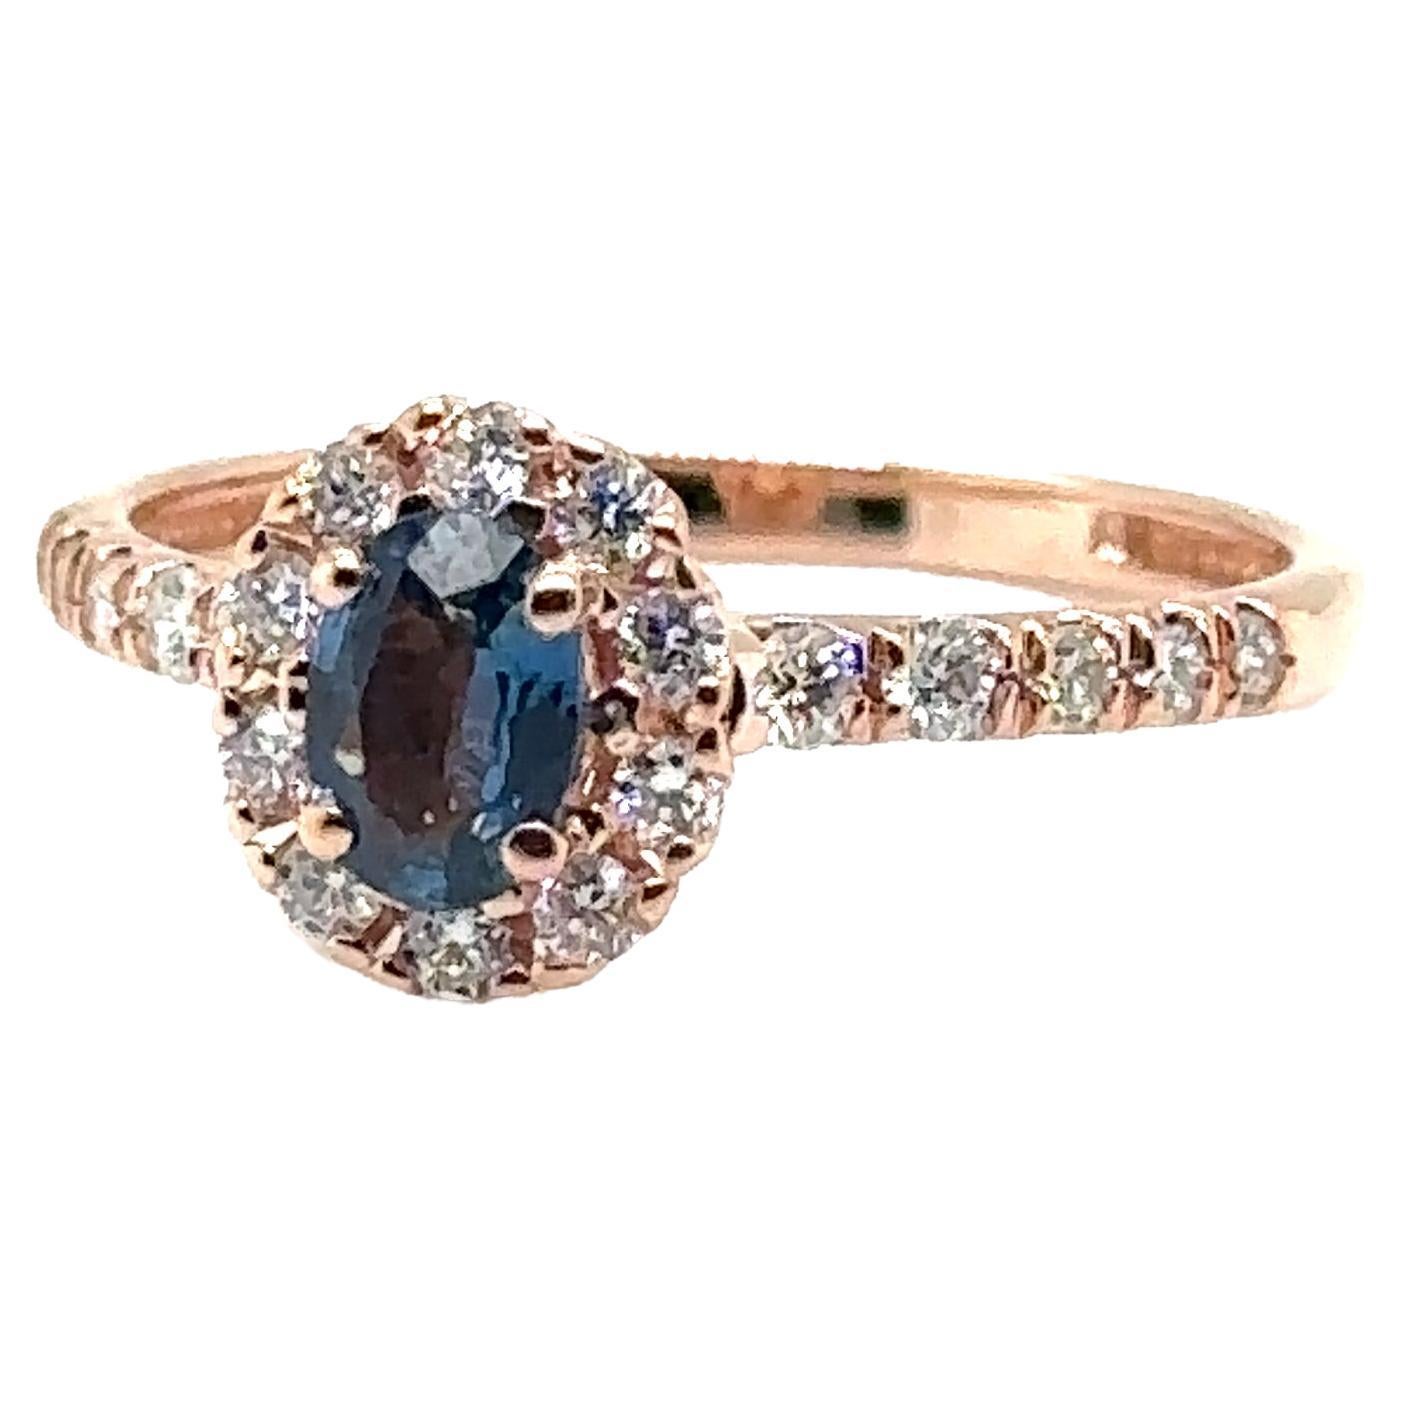 JAS-21-2243 - 14K ROSE GOLD OVAL SAPPHIRE RING with DIAMONDS 